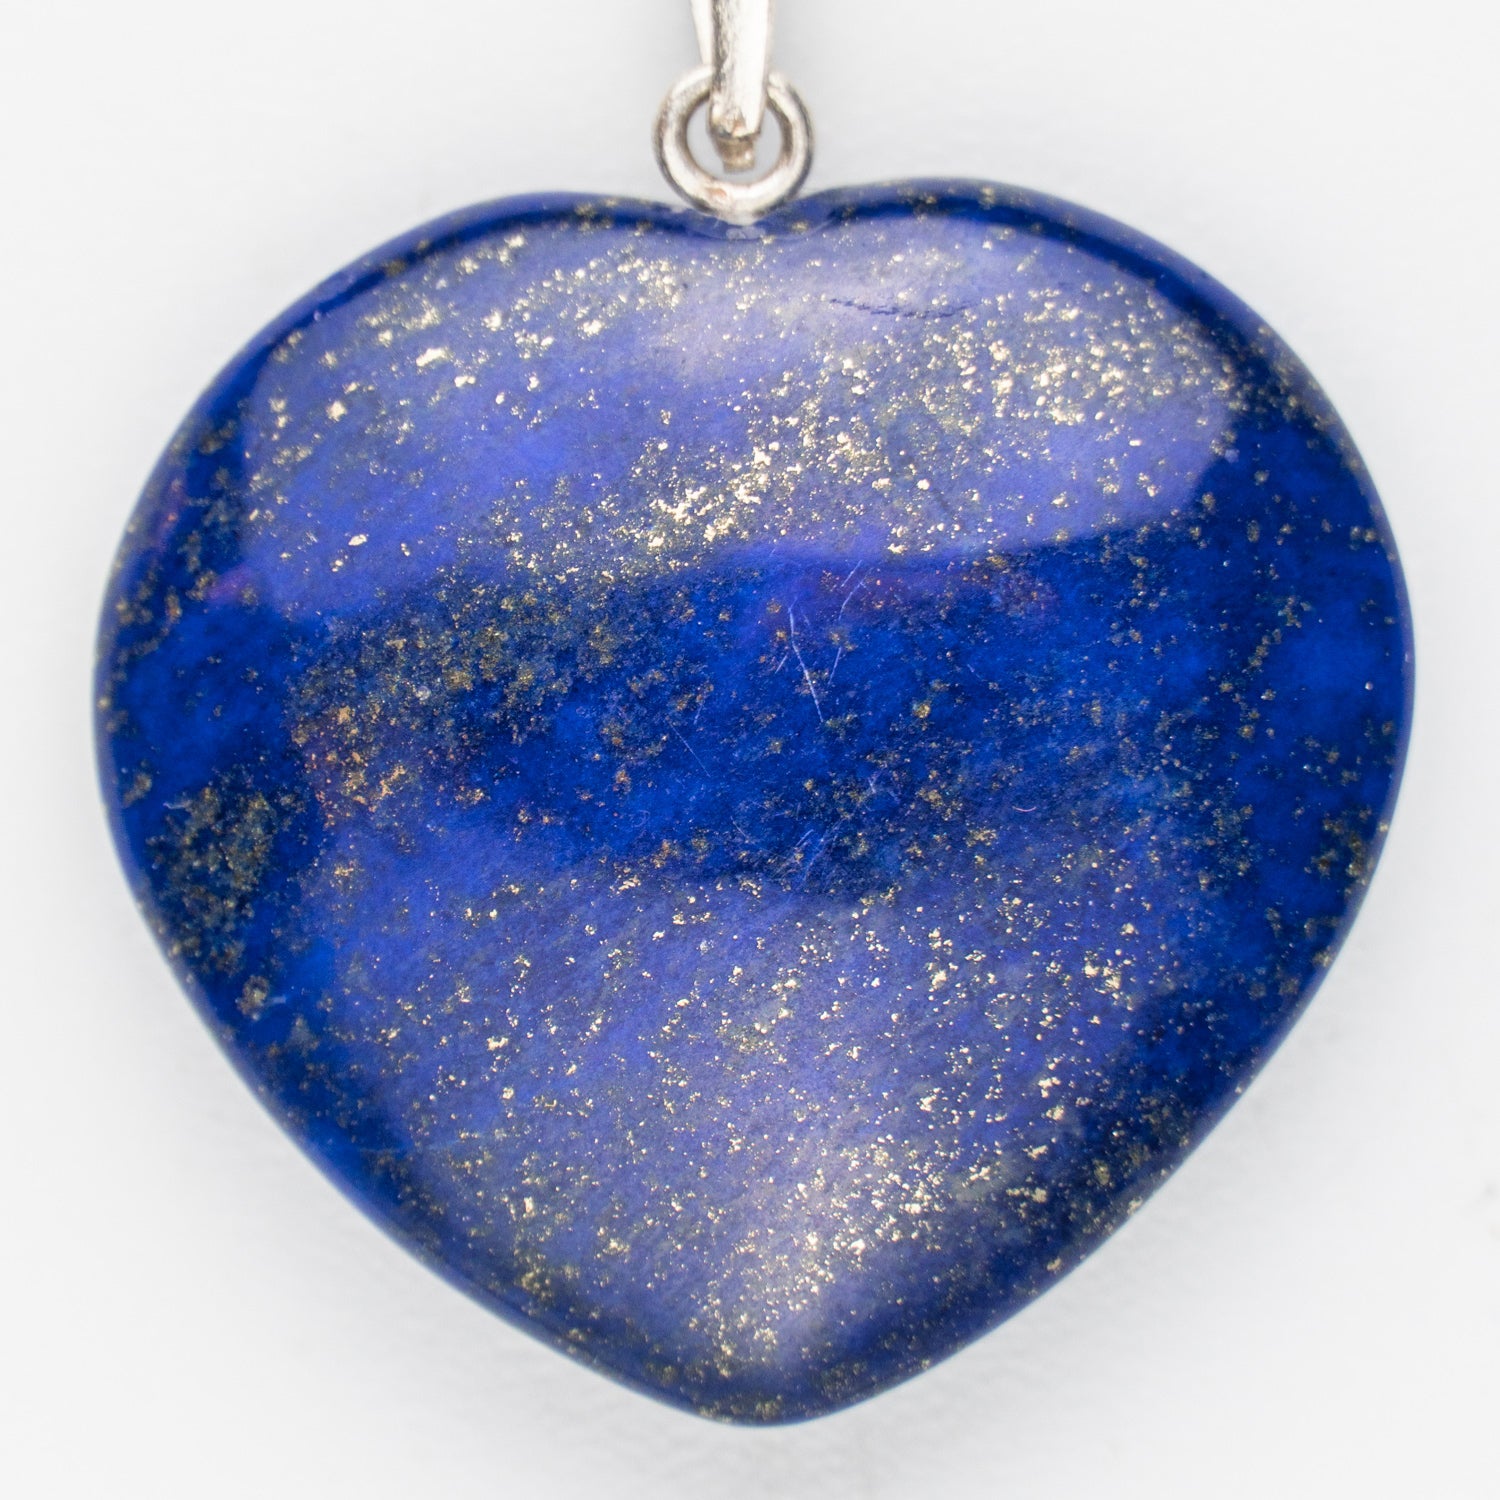 Genuine Lapis Lazuli Heart Pendant (6-8 grams) with Sterling Silver Chain